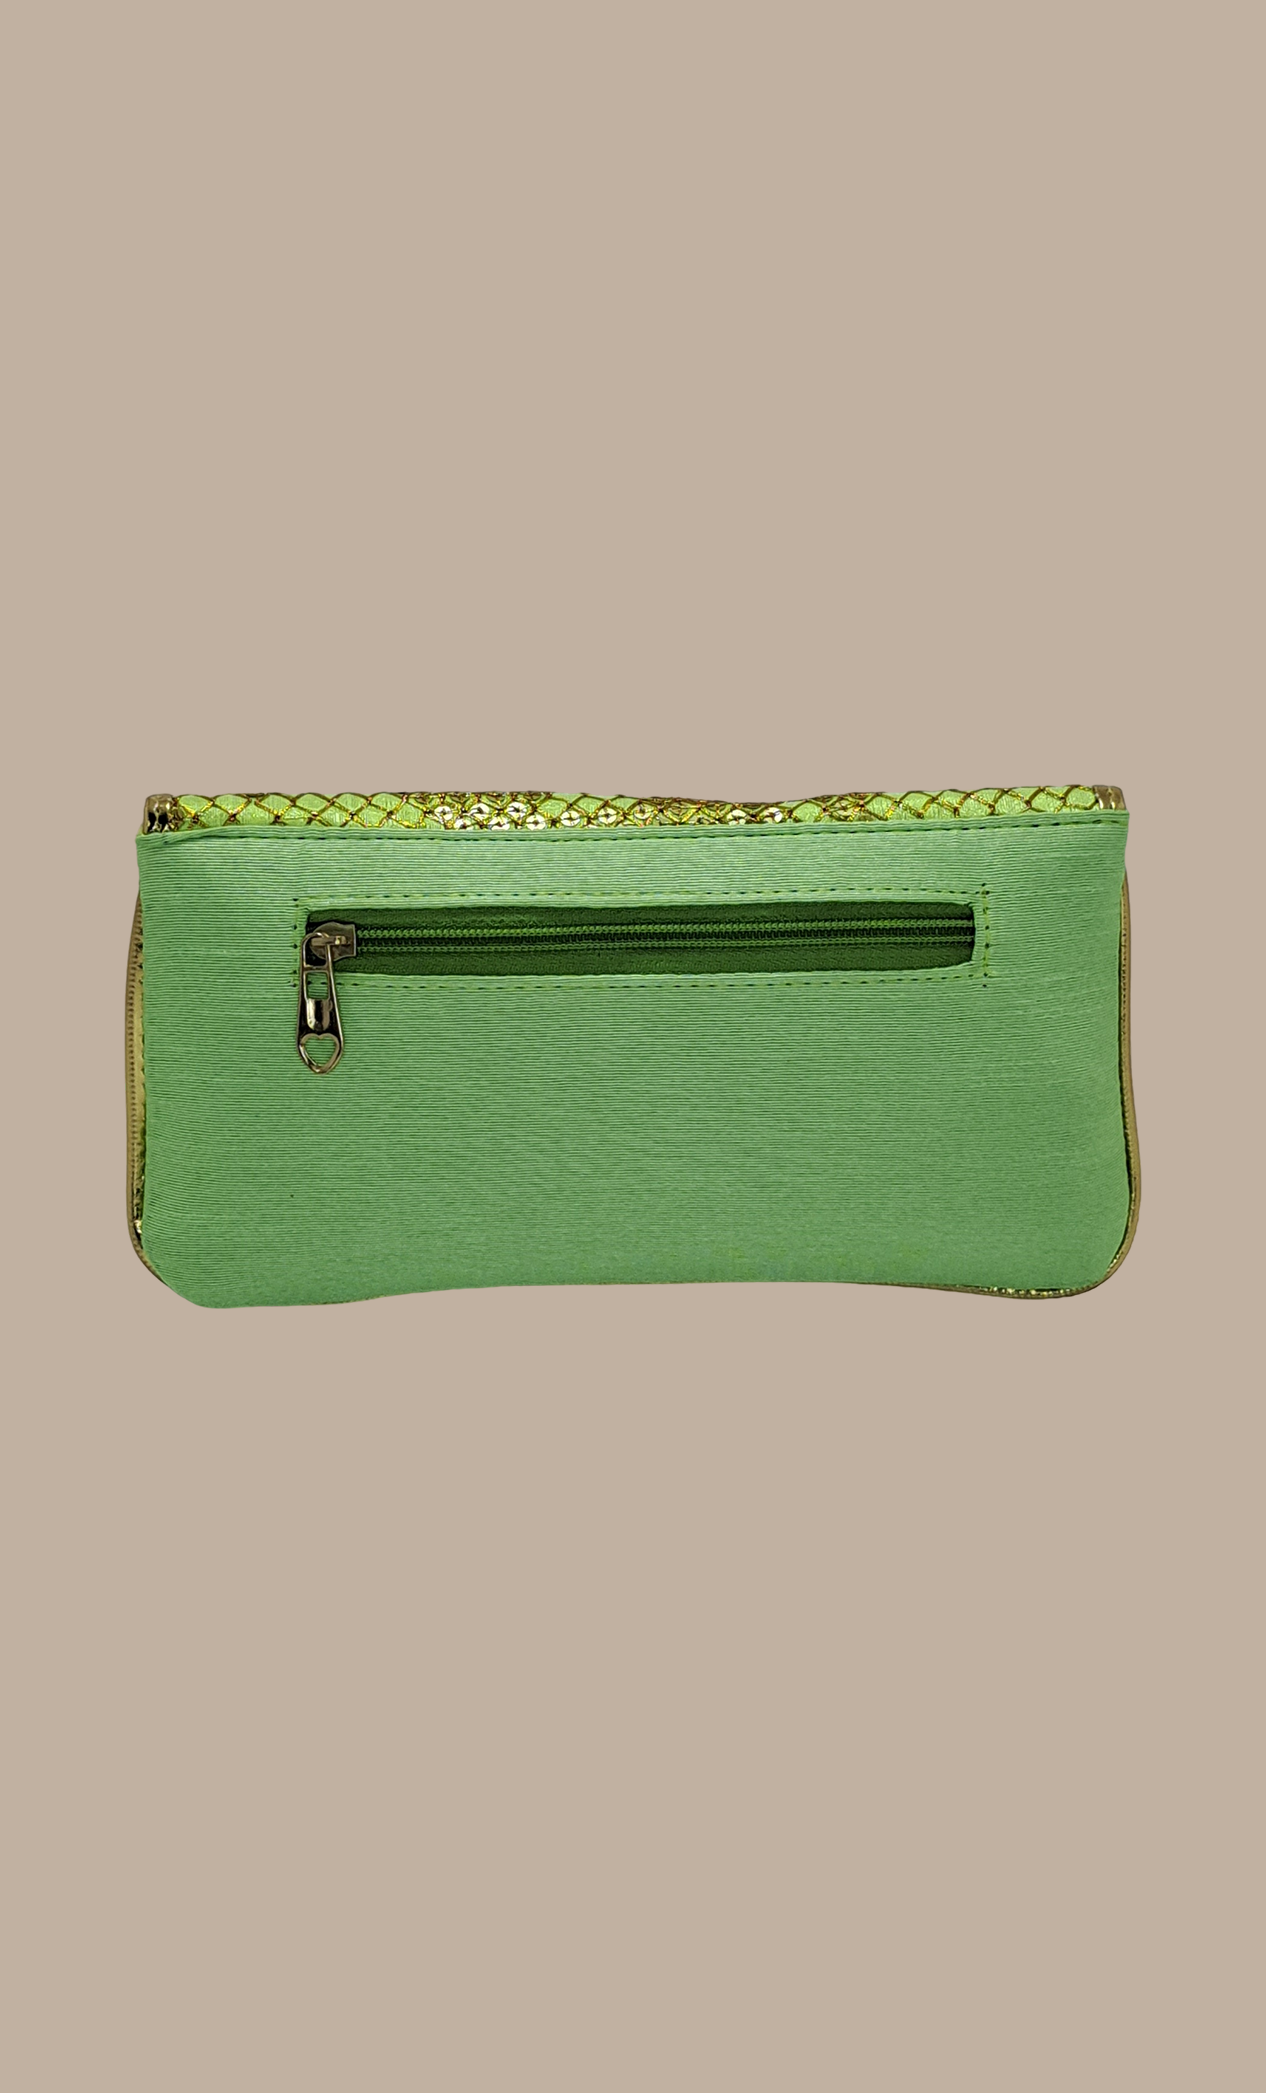 Lime Green Embroidered Clutch Bag